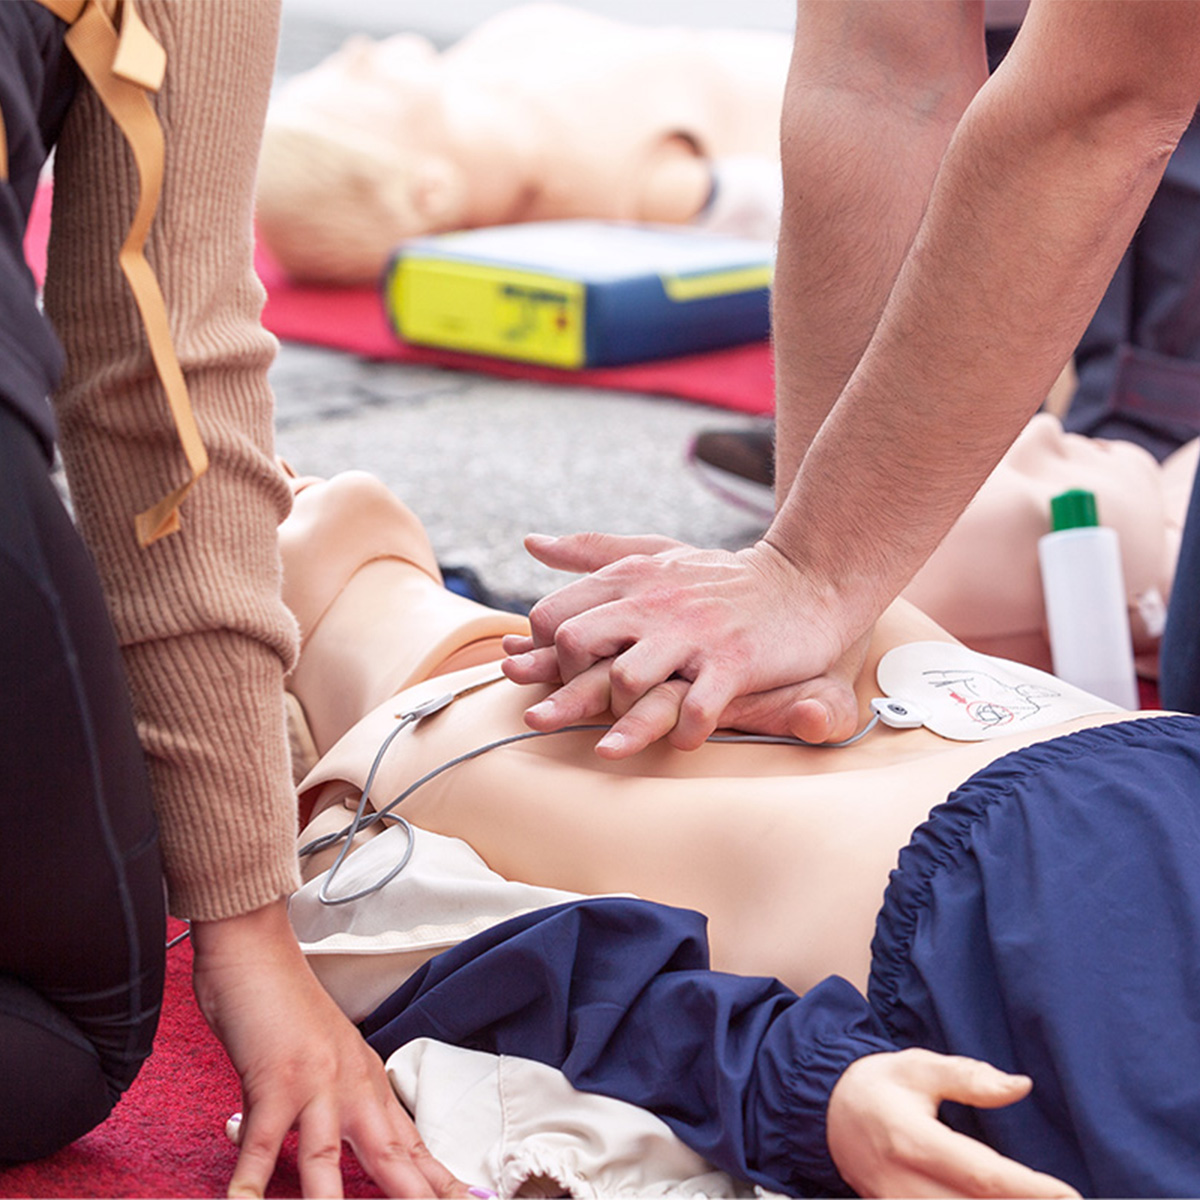 first-aid-training-using-AED-device